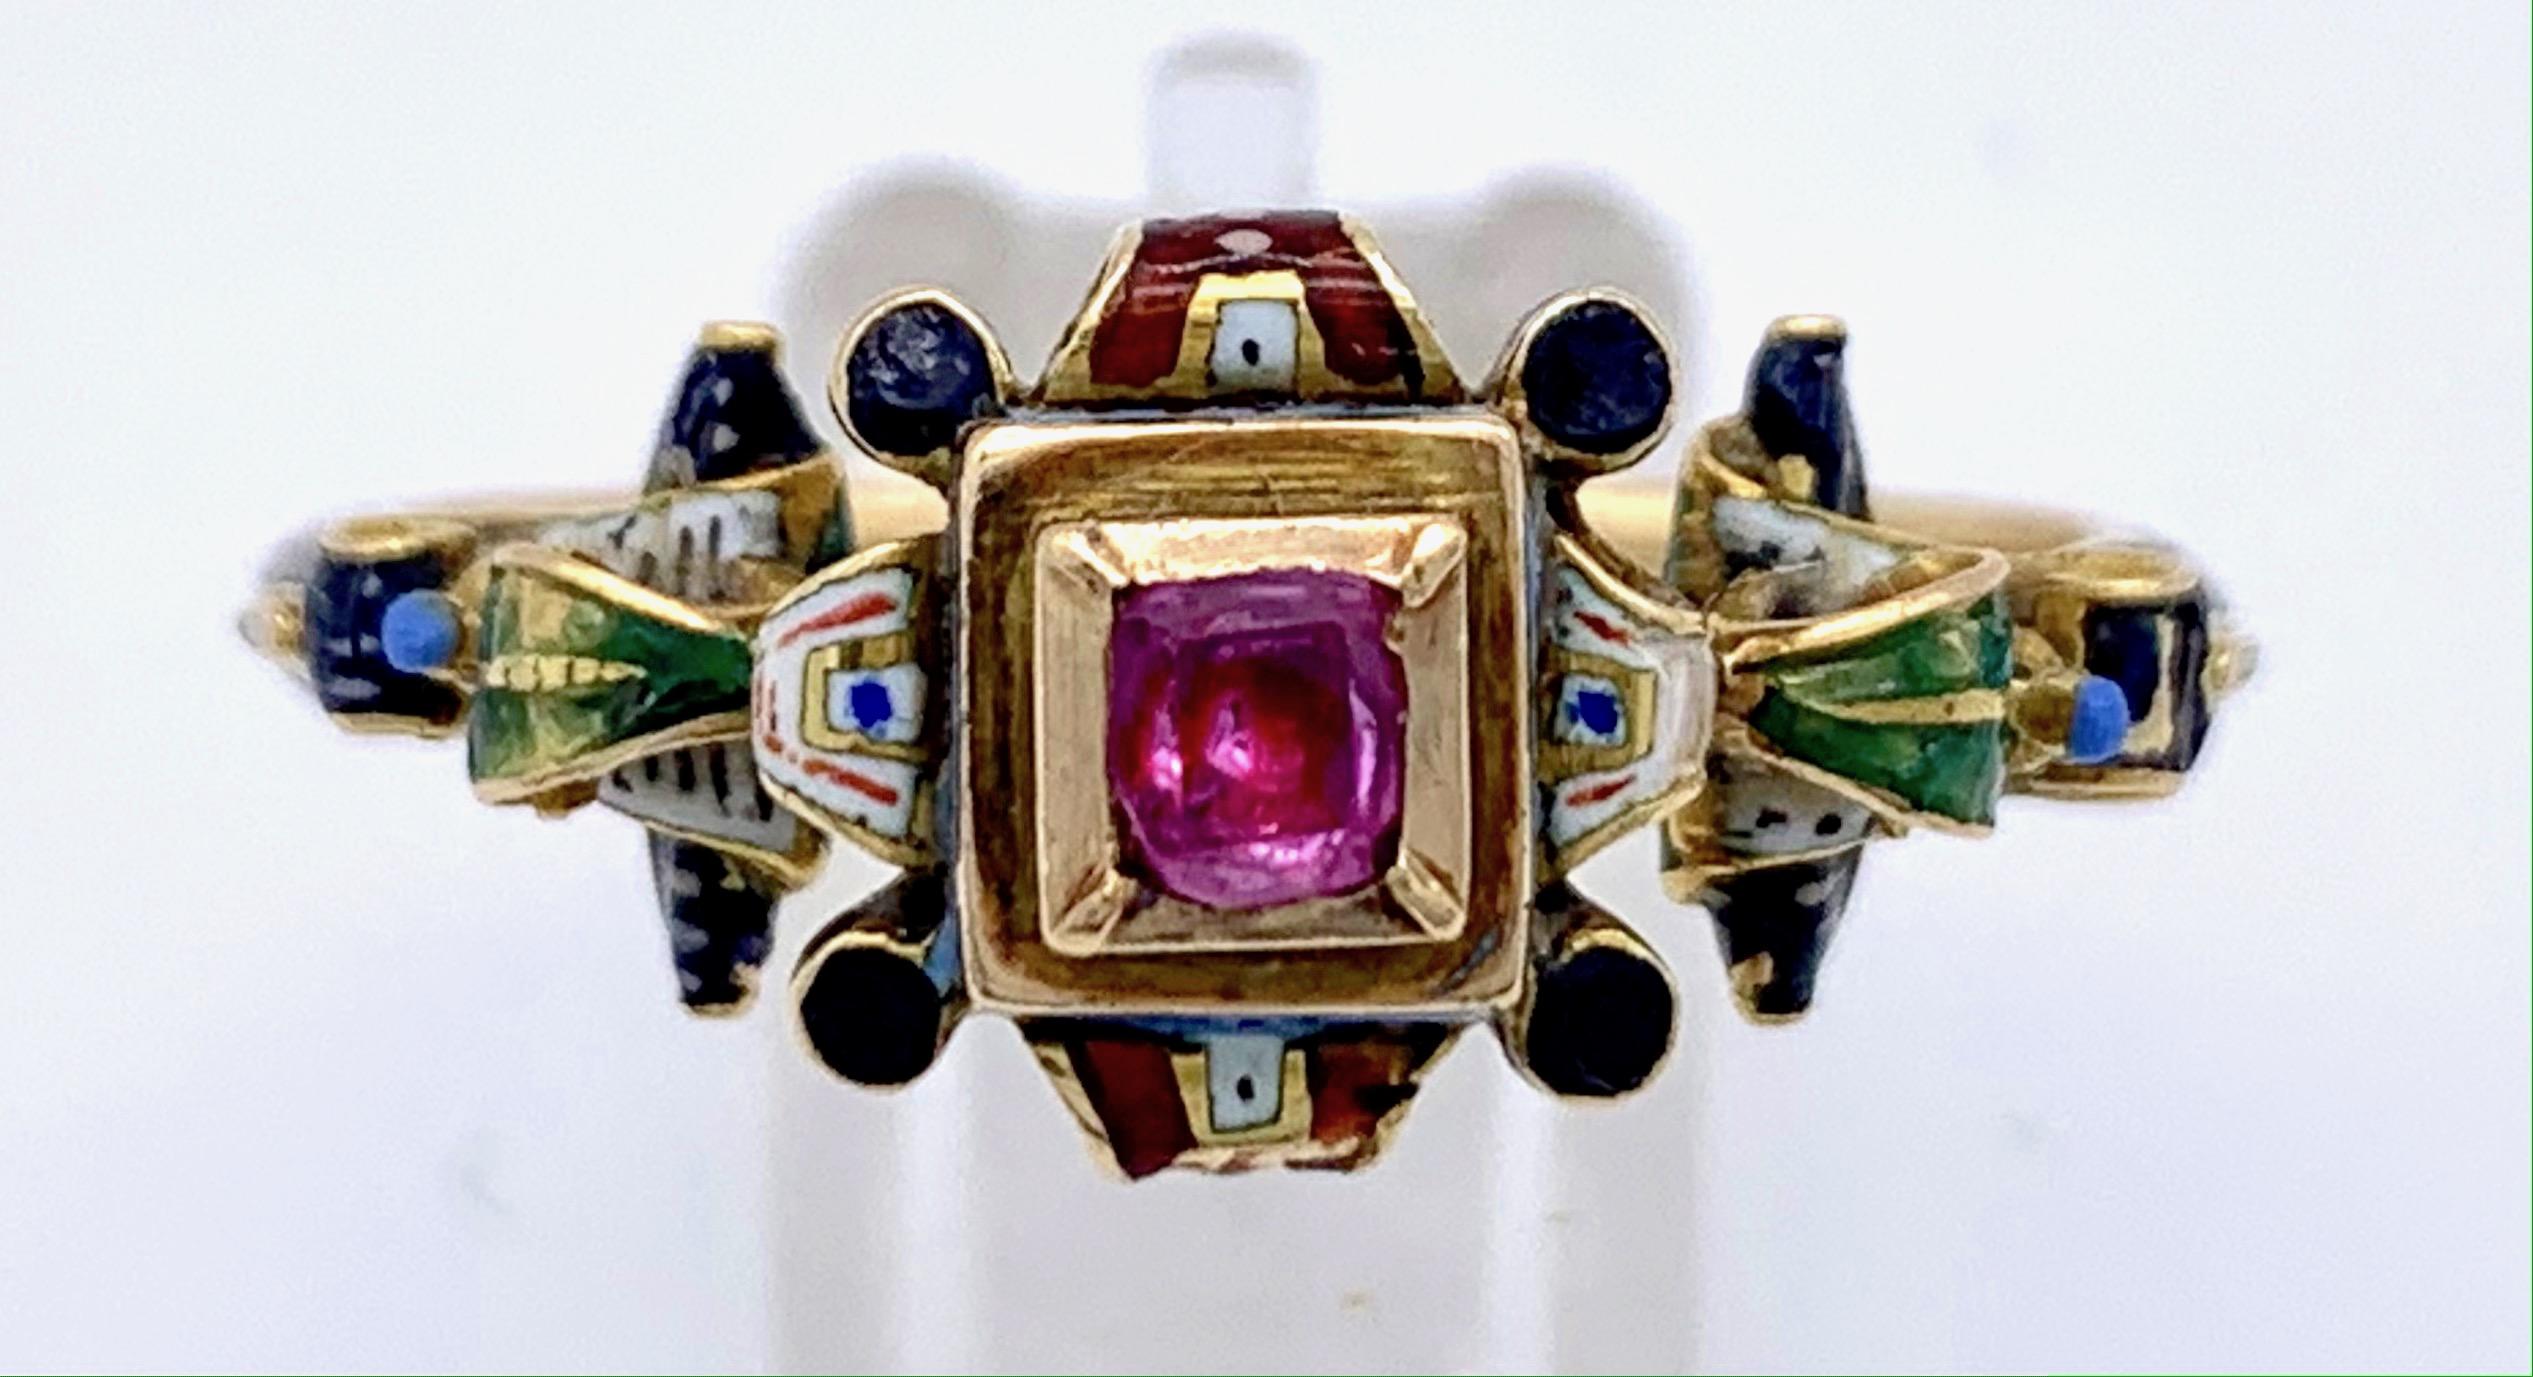 Fantastic and rare polychrome enamelled gold ring in exquisite Neo Renaissance Style of the 1860's. The wonderful and intricate enamel work is executed on 18 karat gold. The ring is set with a square cut pink topaz. The inside of the shank is also